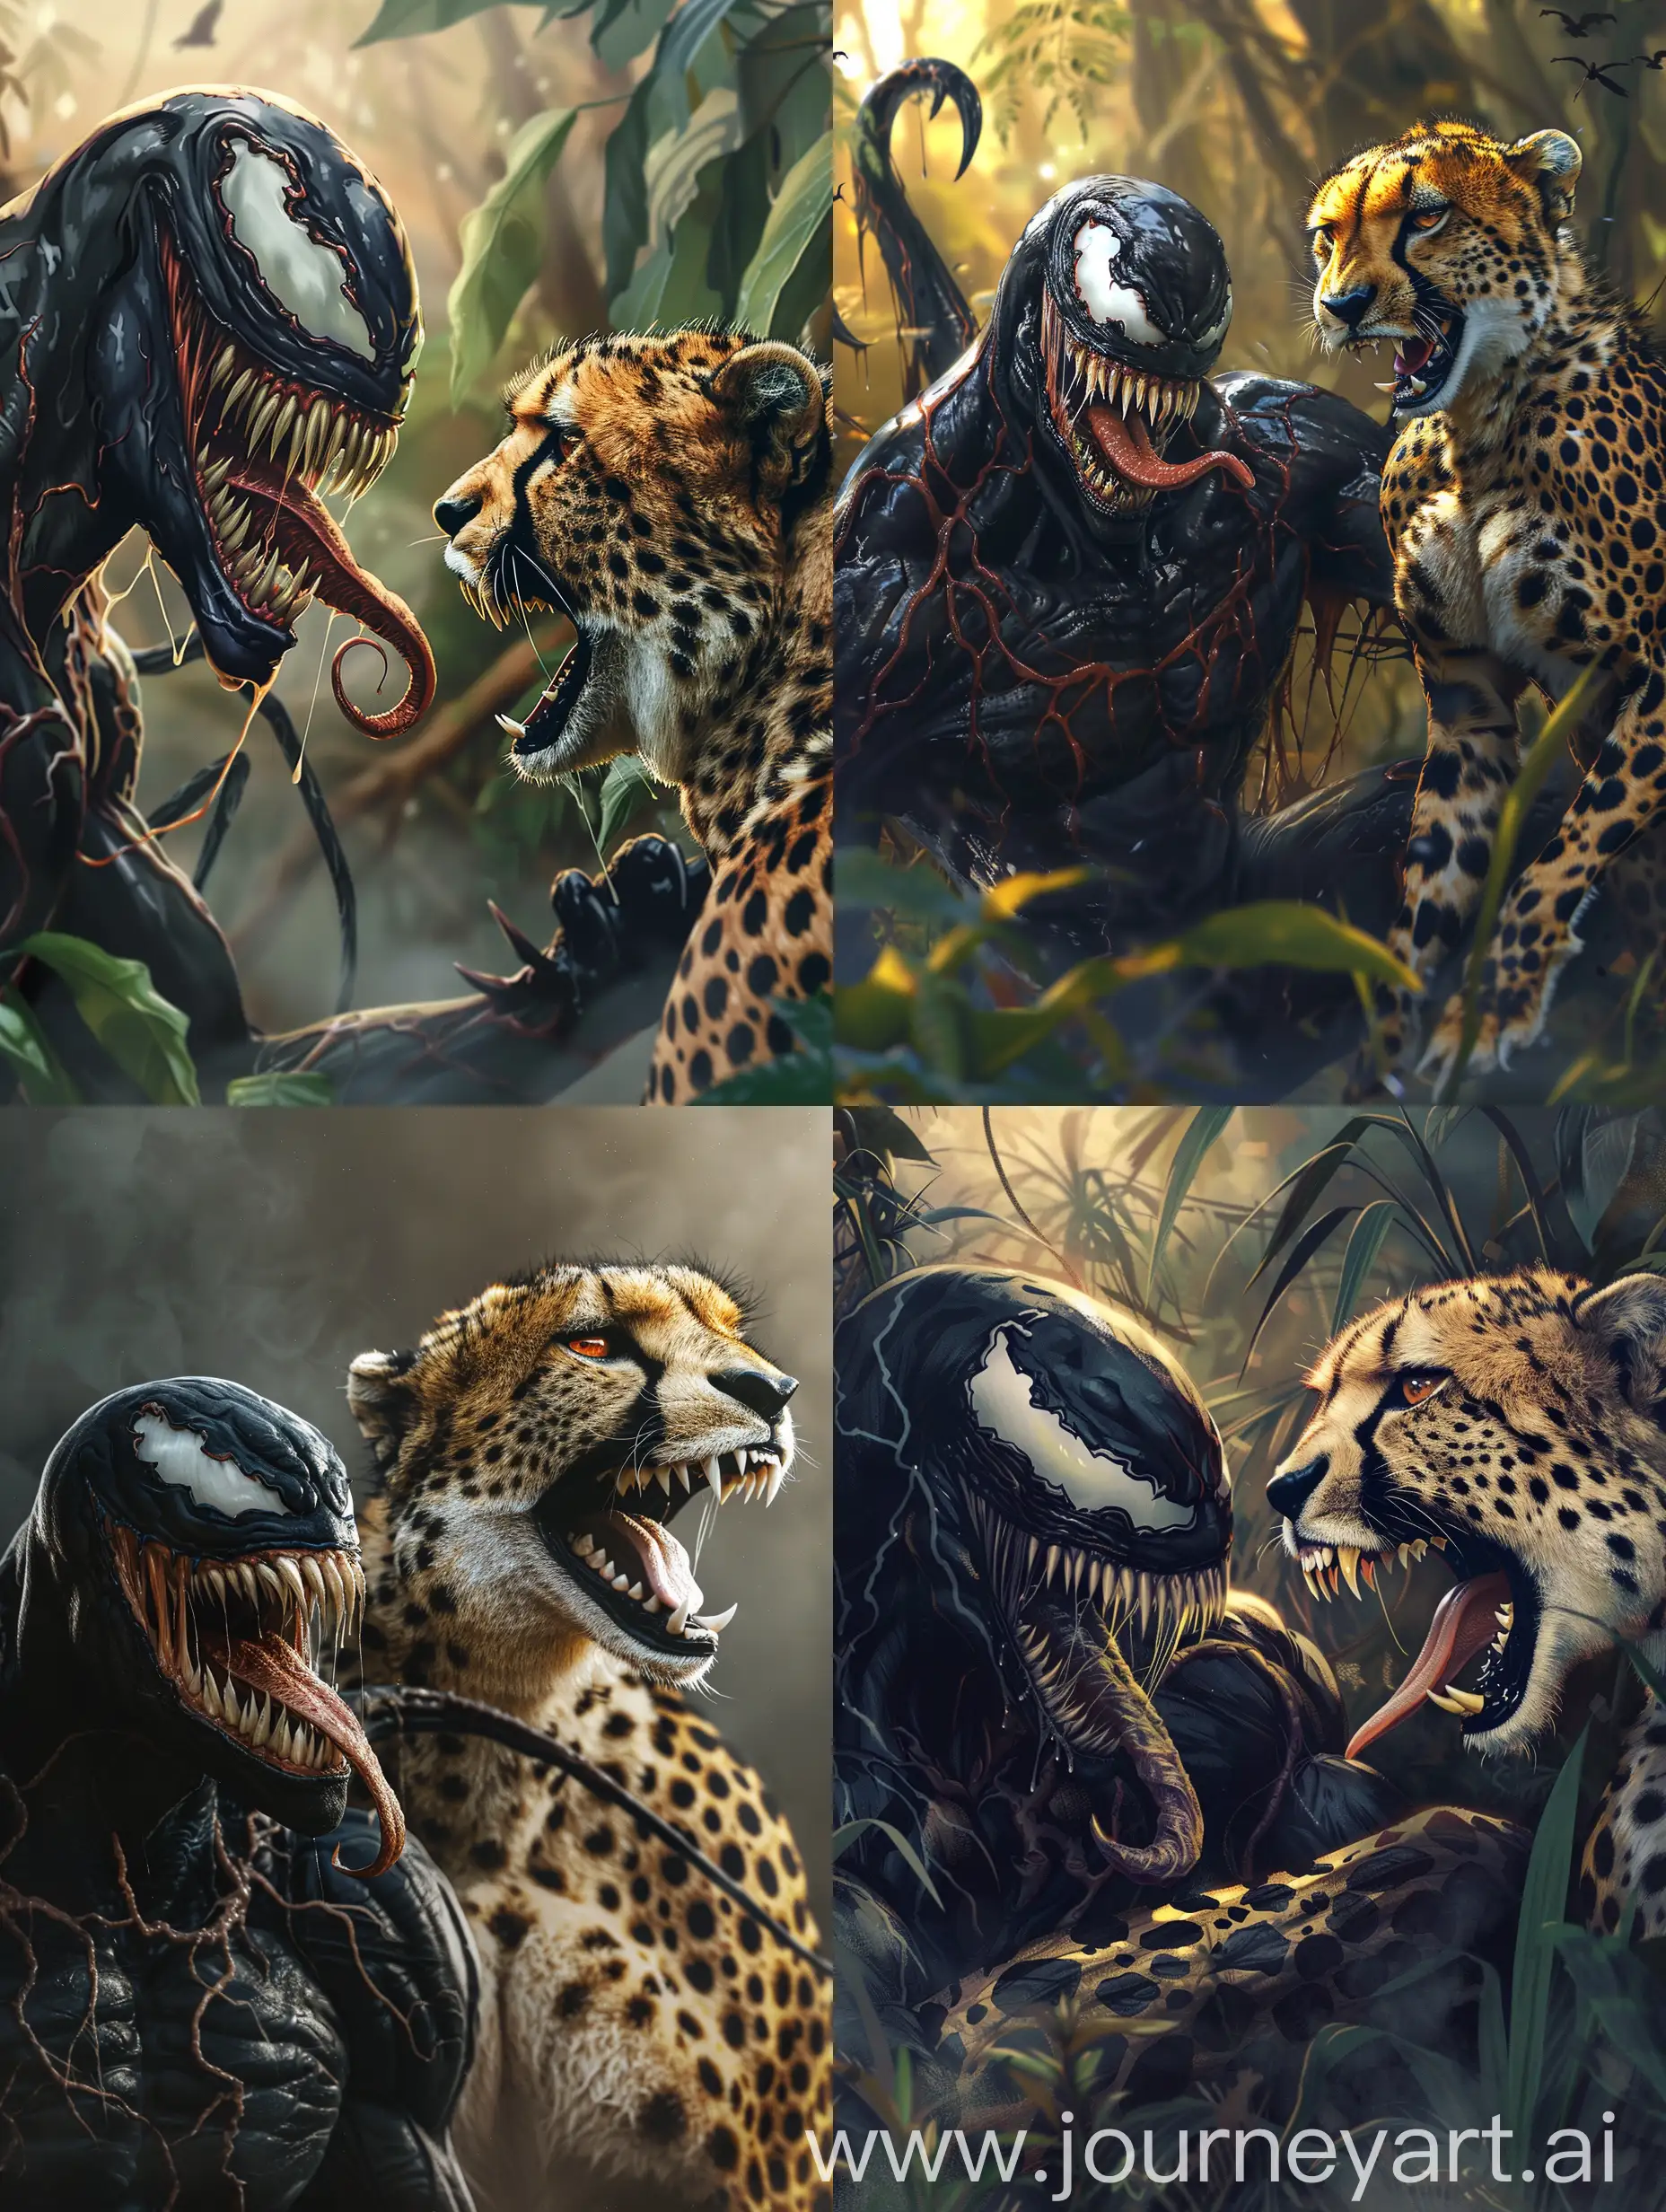 Venom-and-Cheetah-Face-Off-in-Cinematic-Action-Shot